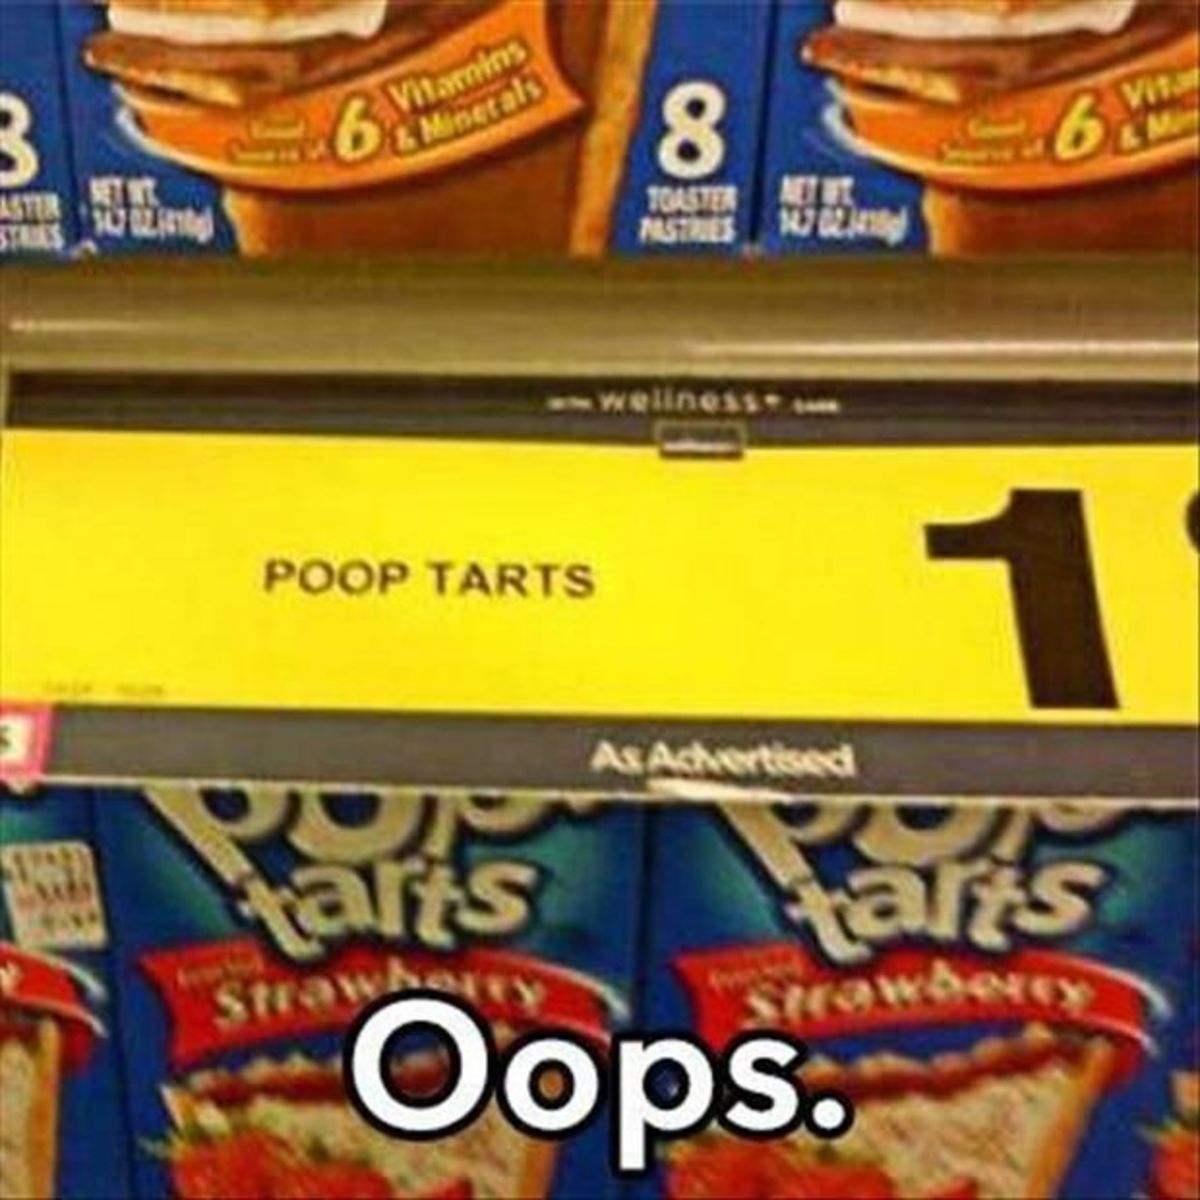 No, I wouldn't want one, thank you. Spelling mistakes can make things very awkward for the tarts sometimes.